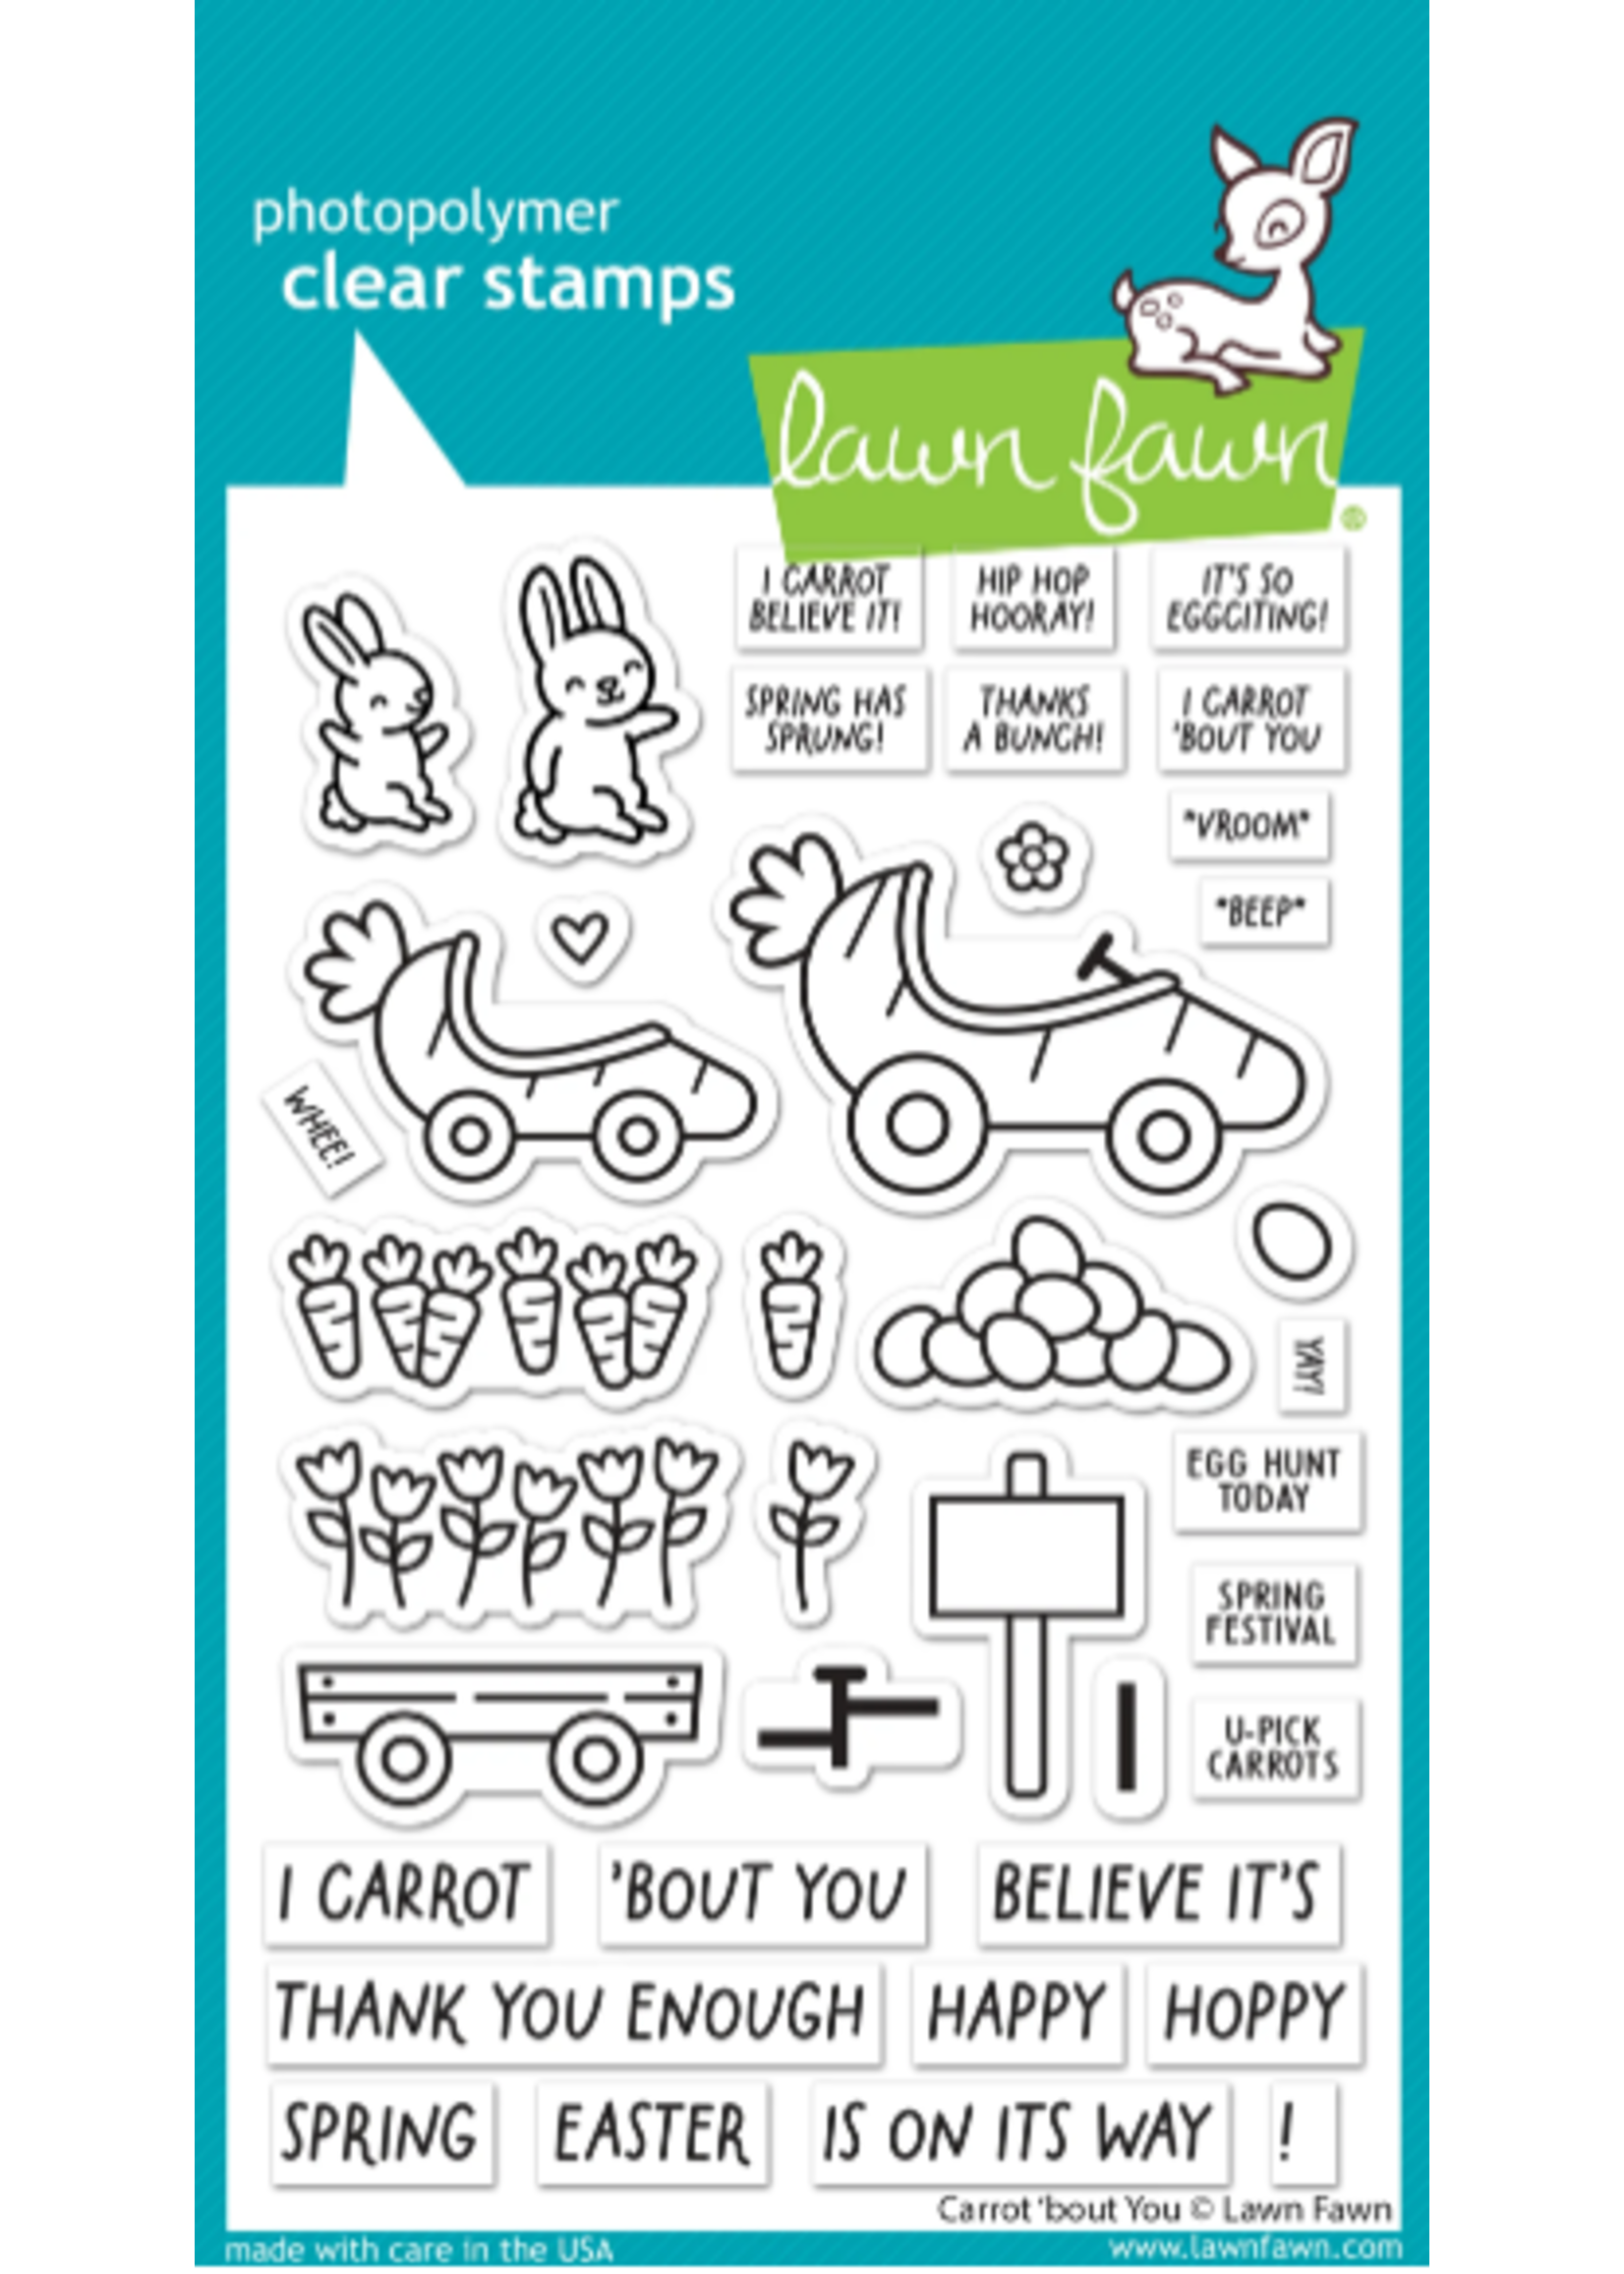 LAWN FAWN Carrot 'bout You